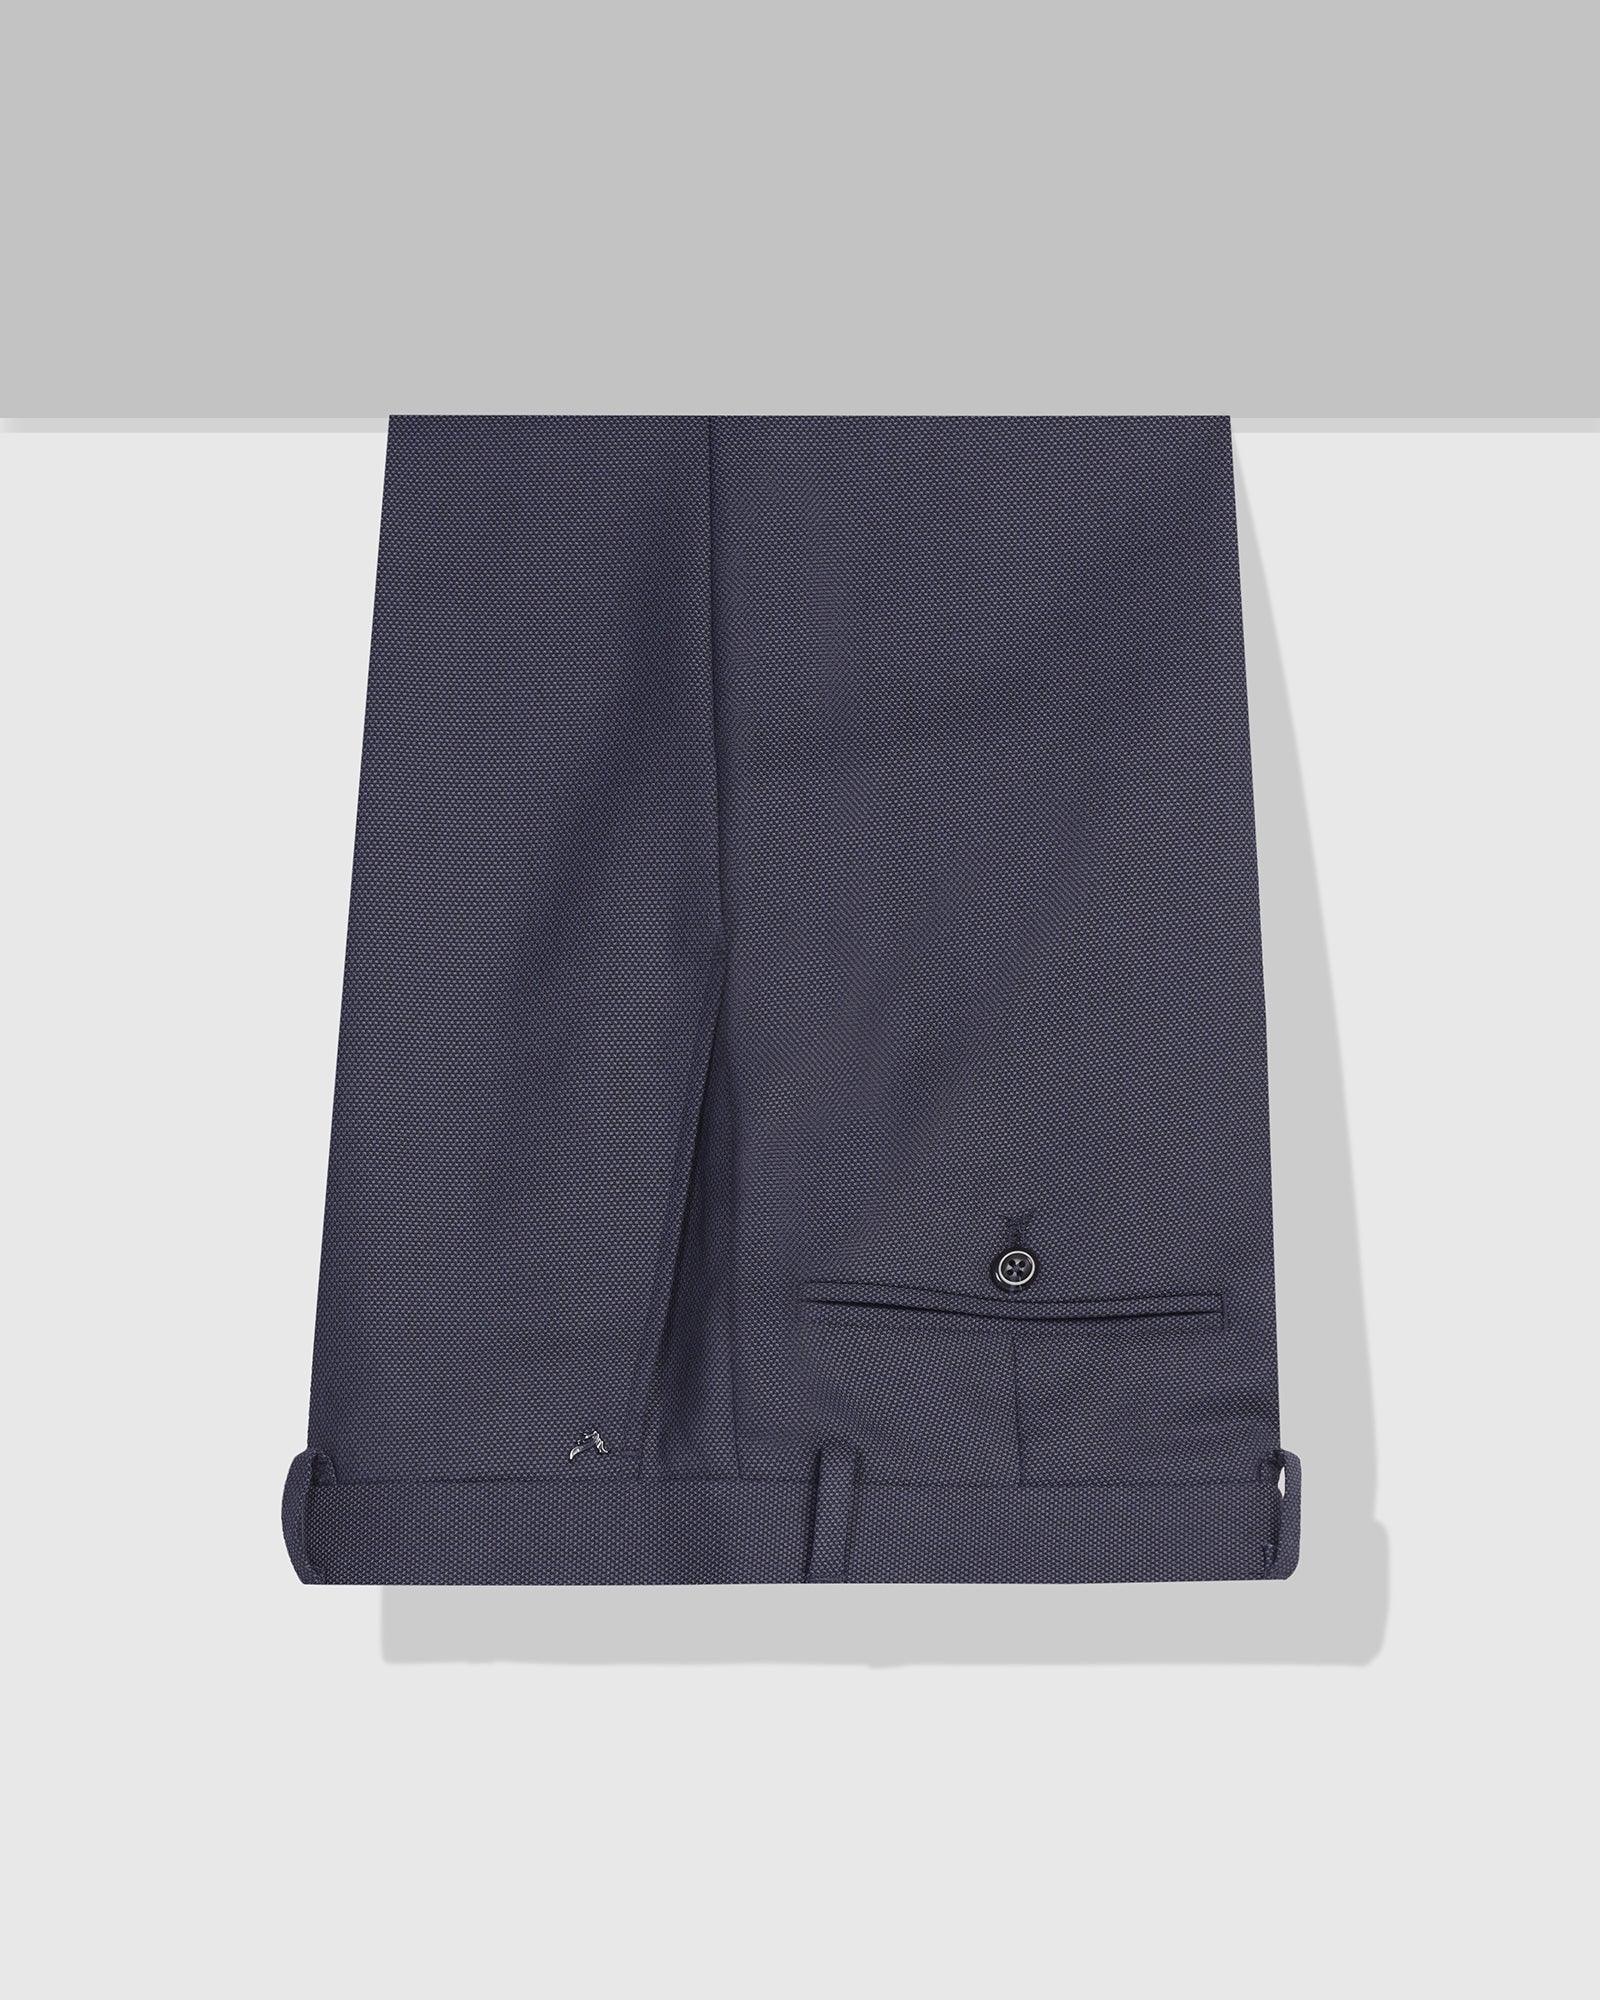 Slim Fit B-91 Formal Navy Textured Trouser - Sive